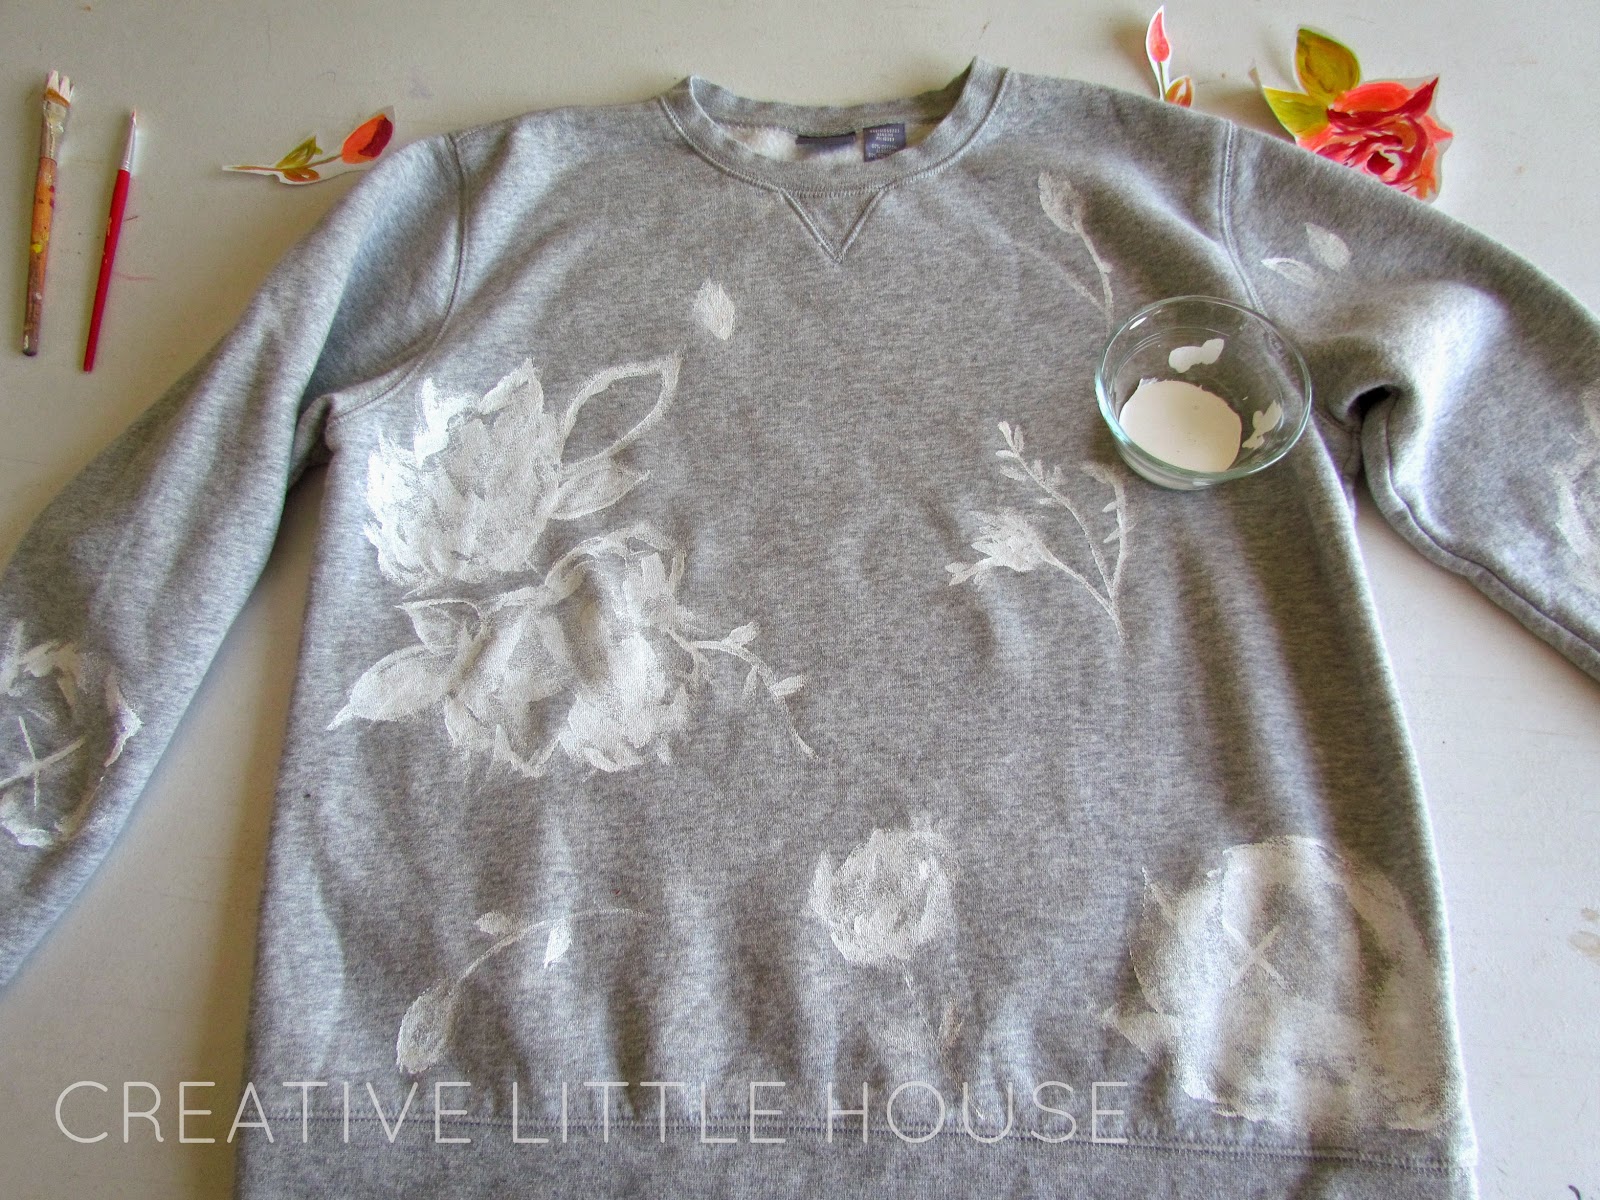 Creative Little House: DIY Painted Rose Sweatshirt: Comfy and Pretty